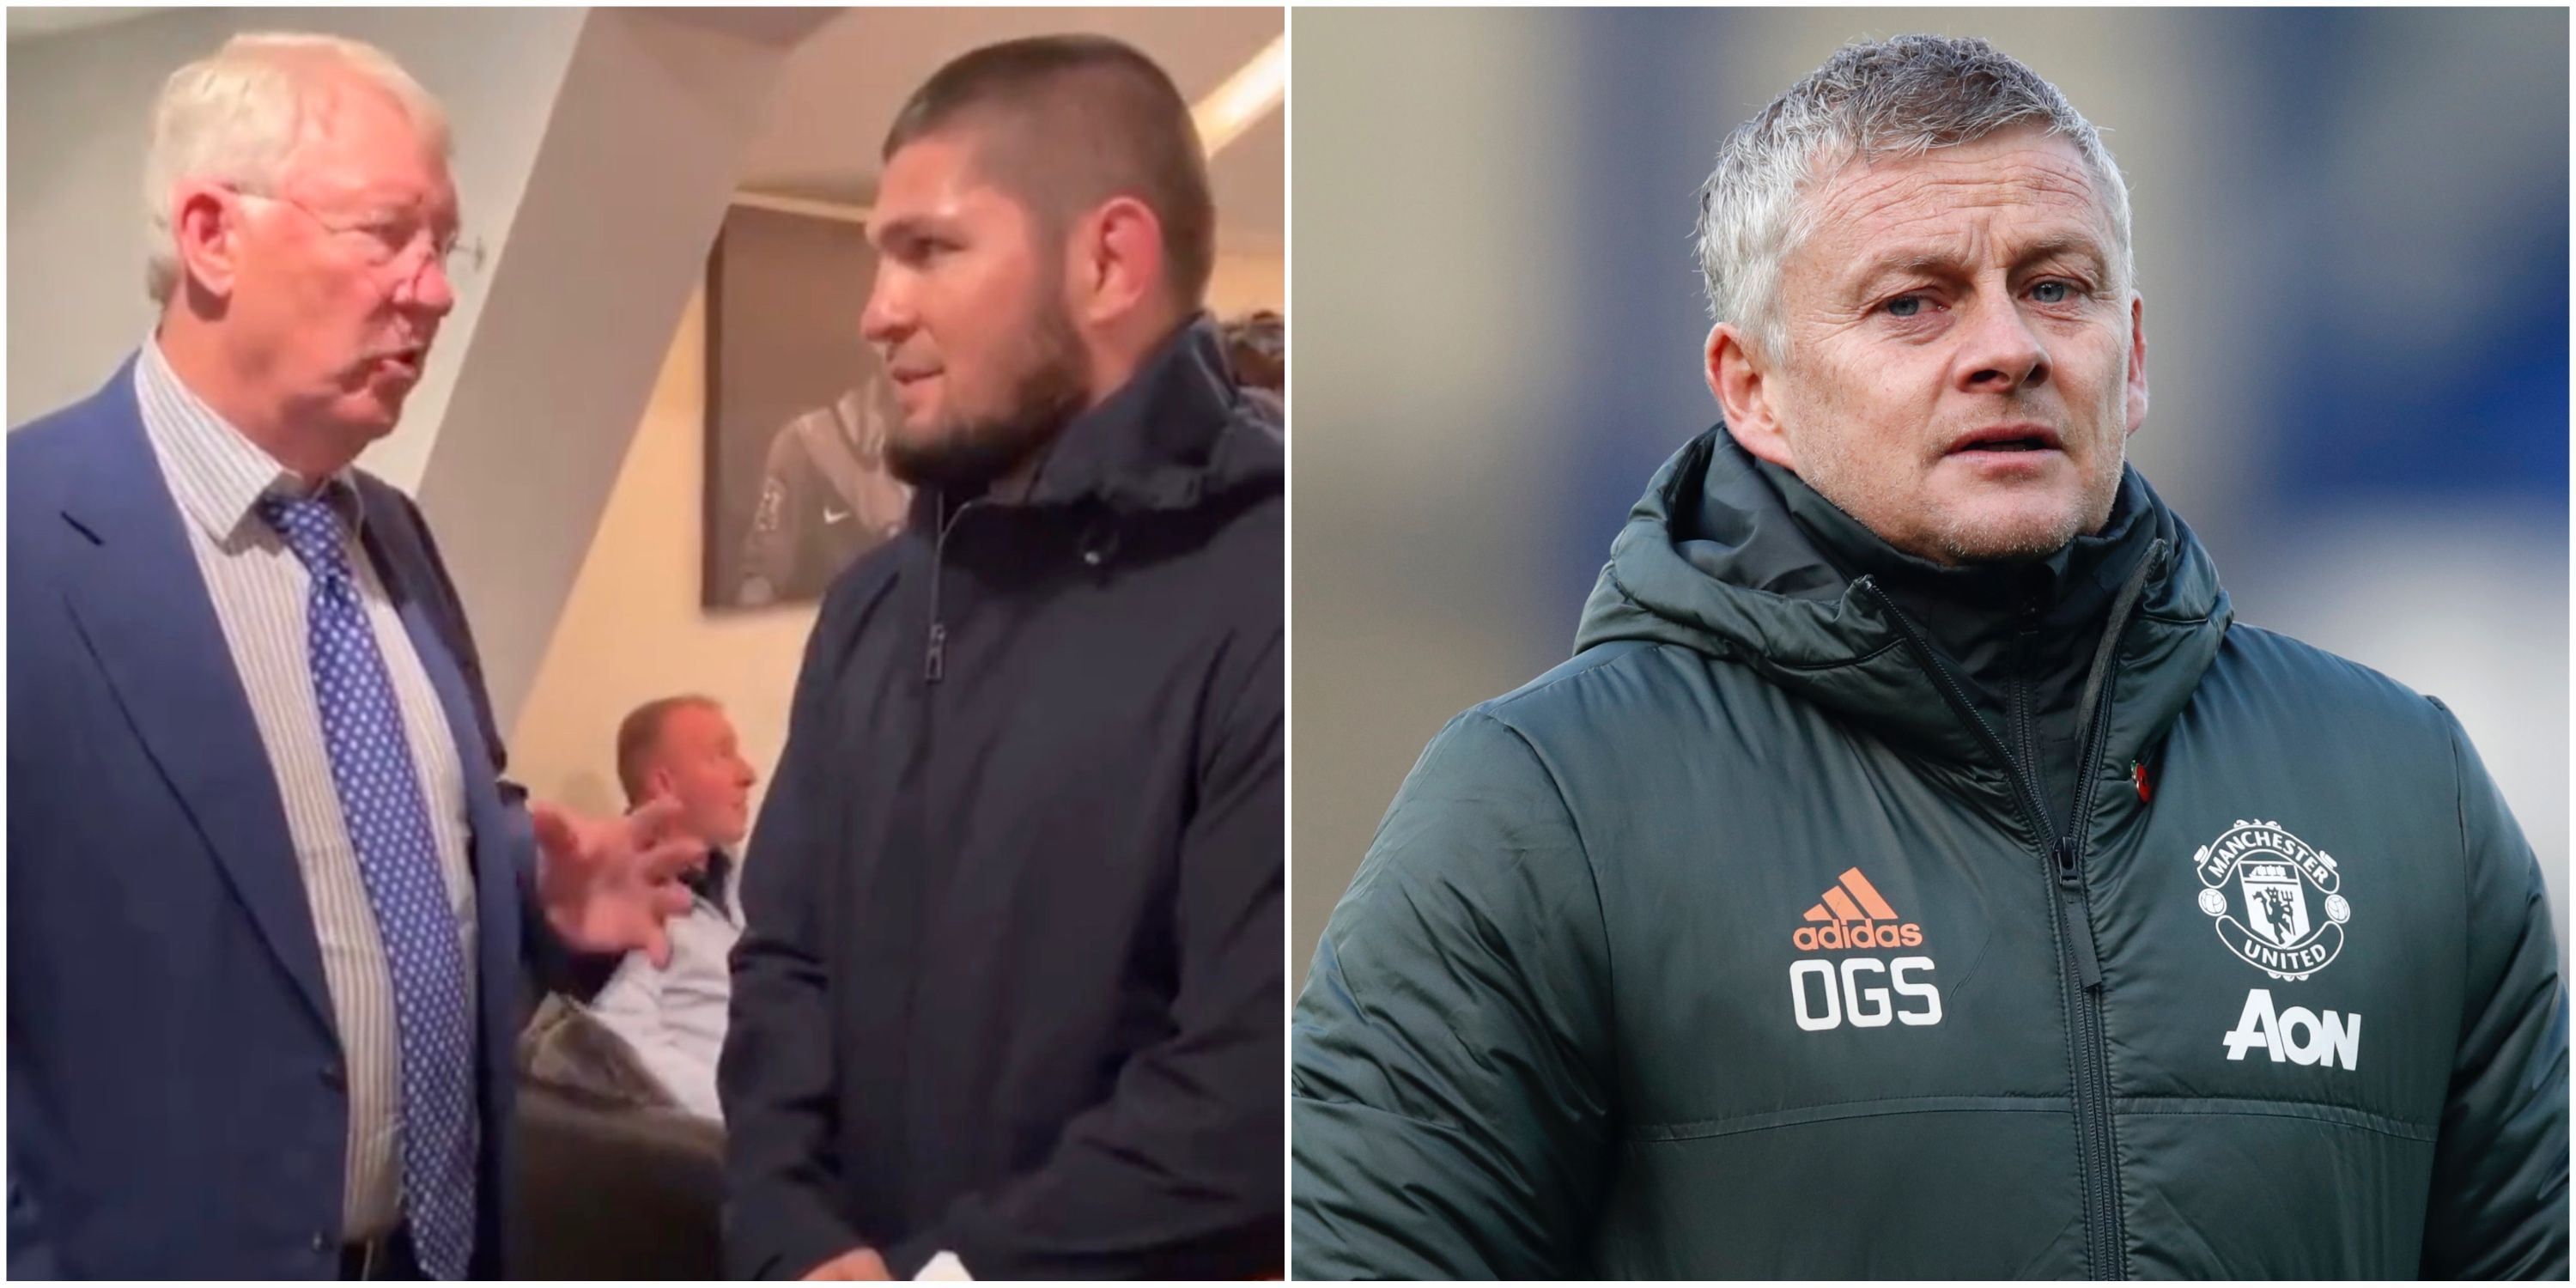 Ole Gunner Solskjaer reveals Ferguson apologised to him after his comments to Khabib went viral